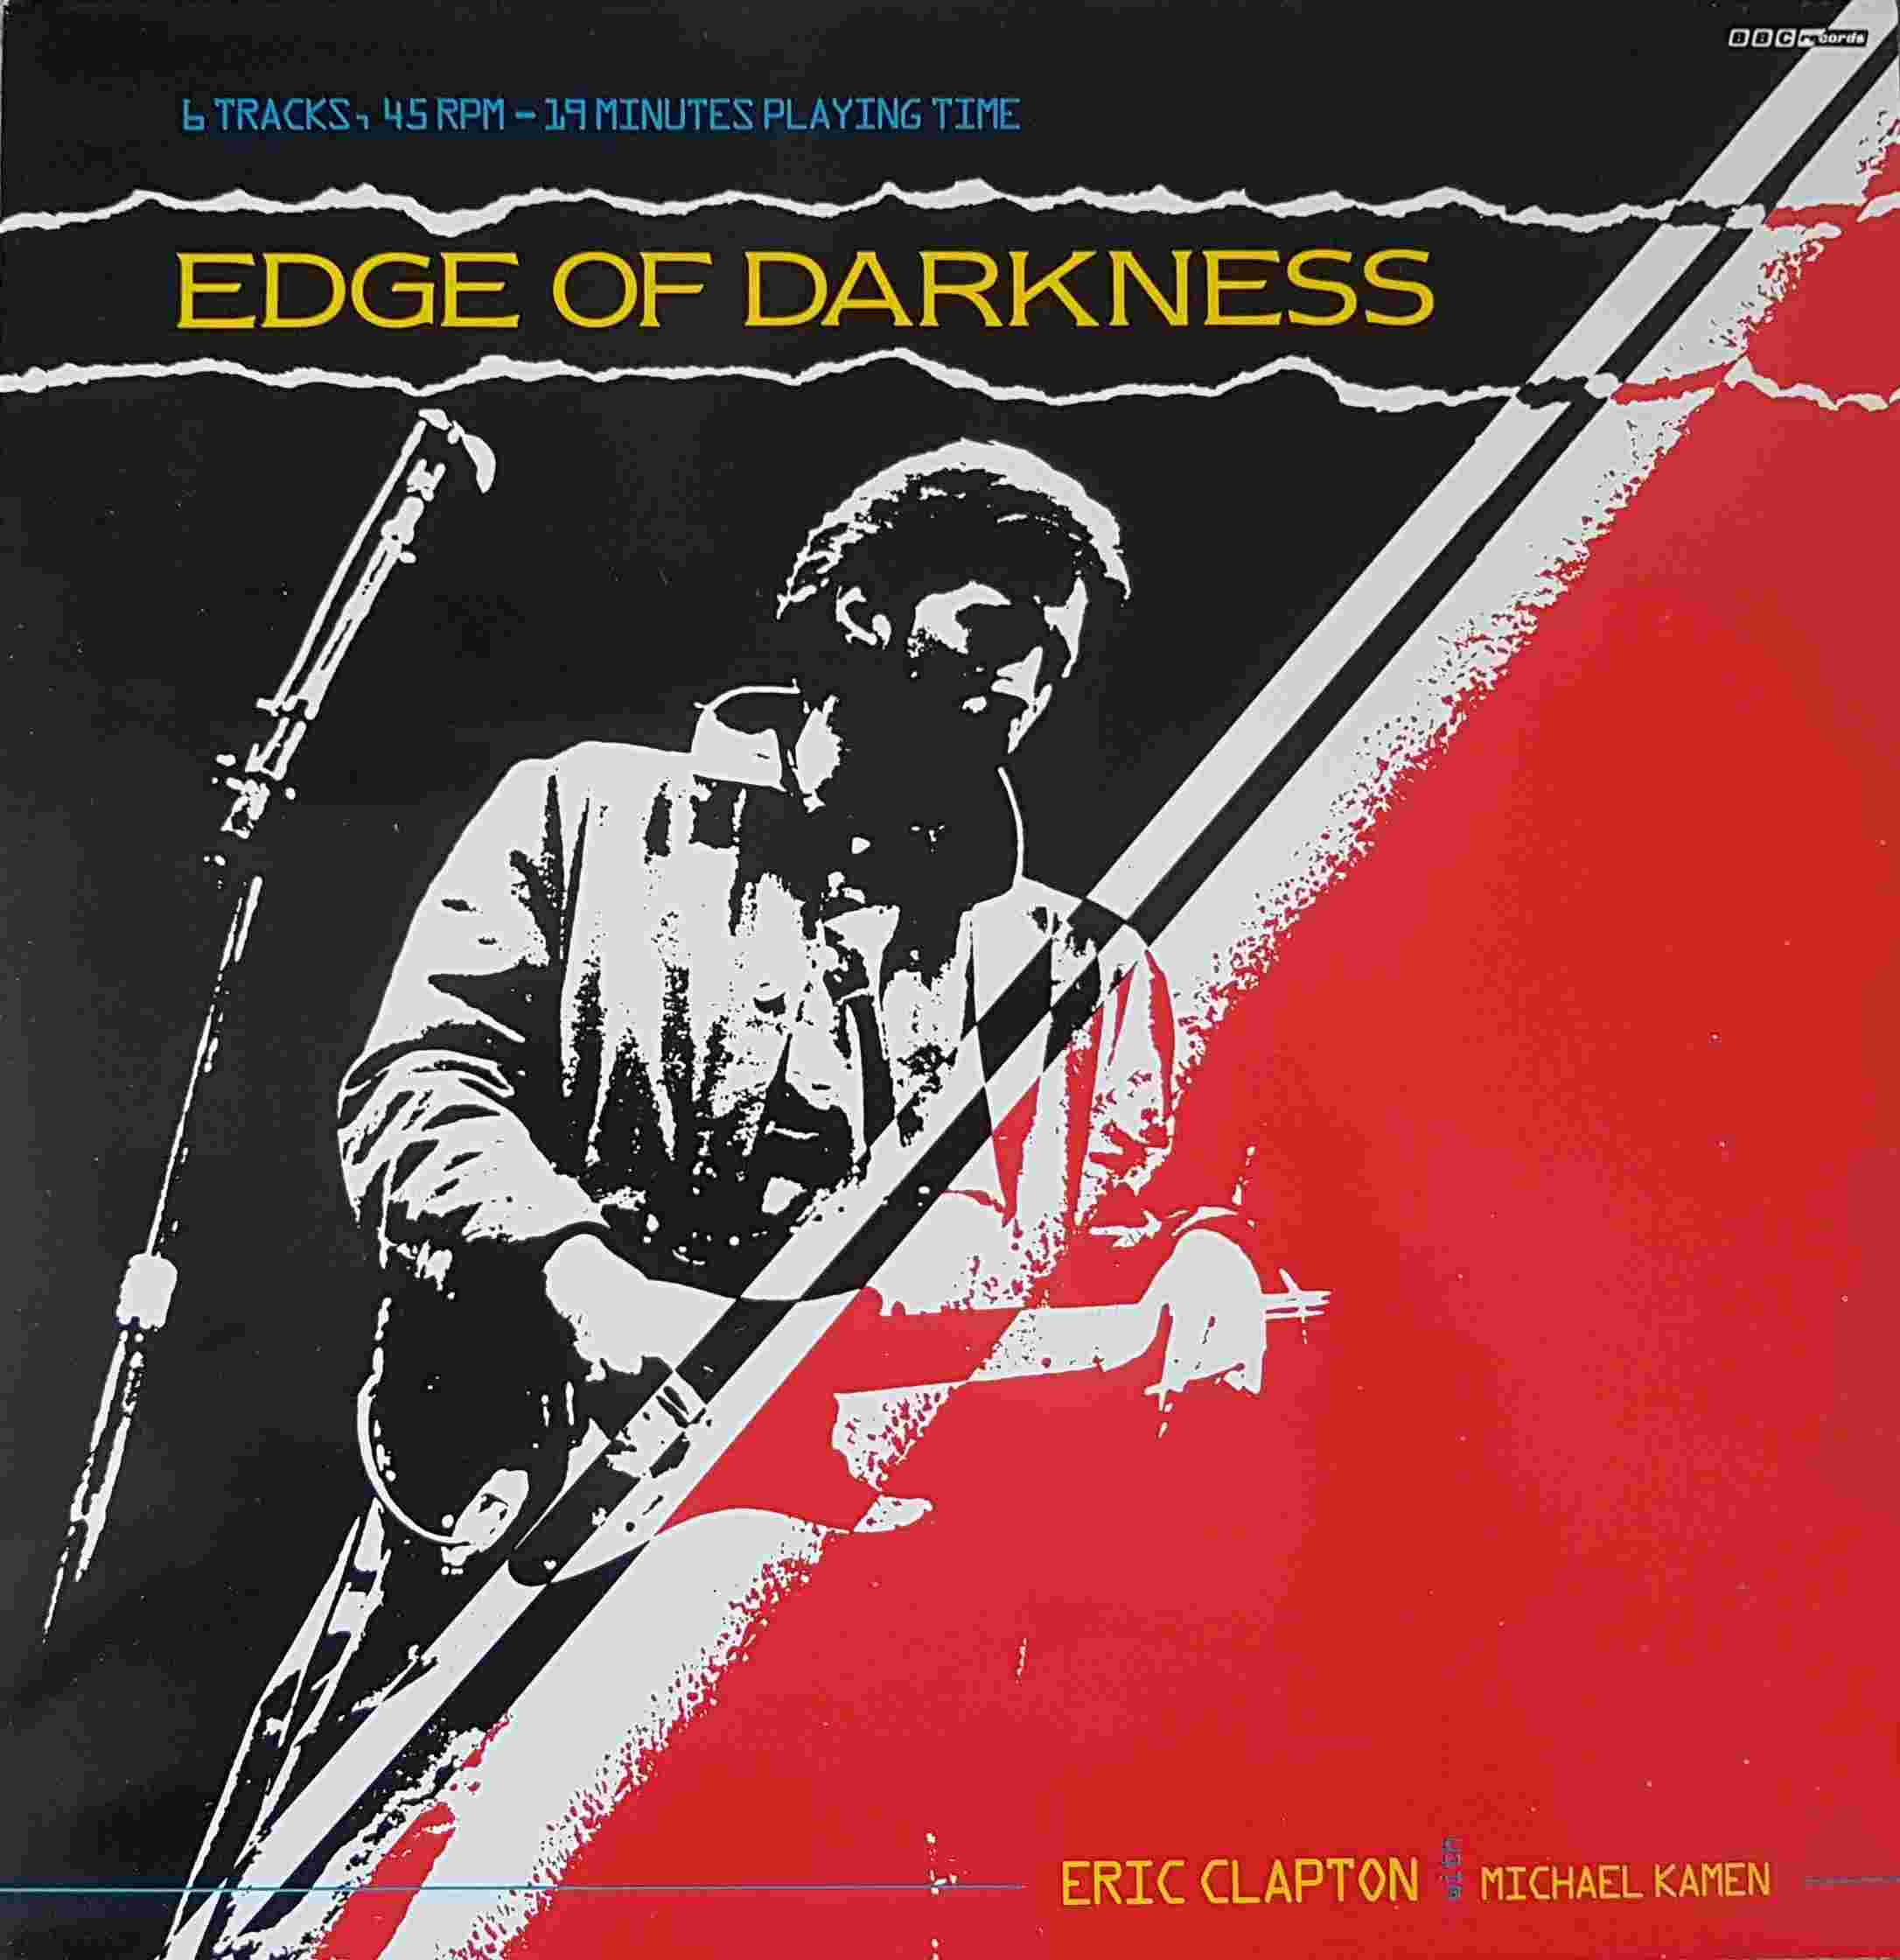 Picture of 12 RSL 178 Edge of darkness by artist Eric Clapton / Mike Kamen from the BBC 12inches - Records and Tapes library